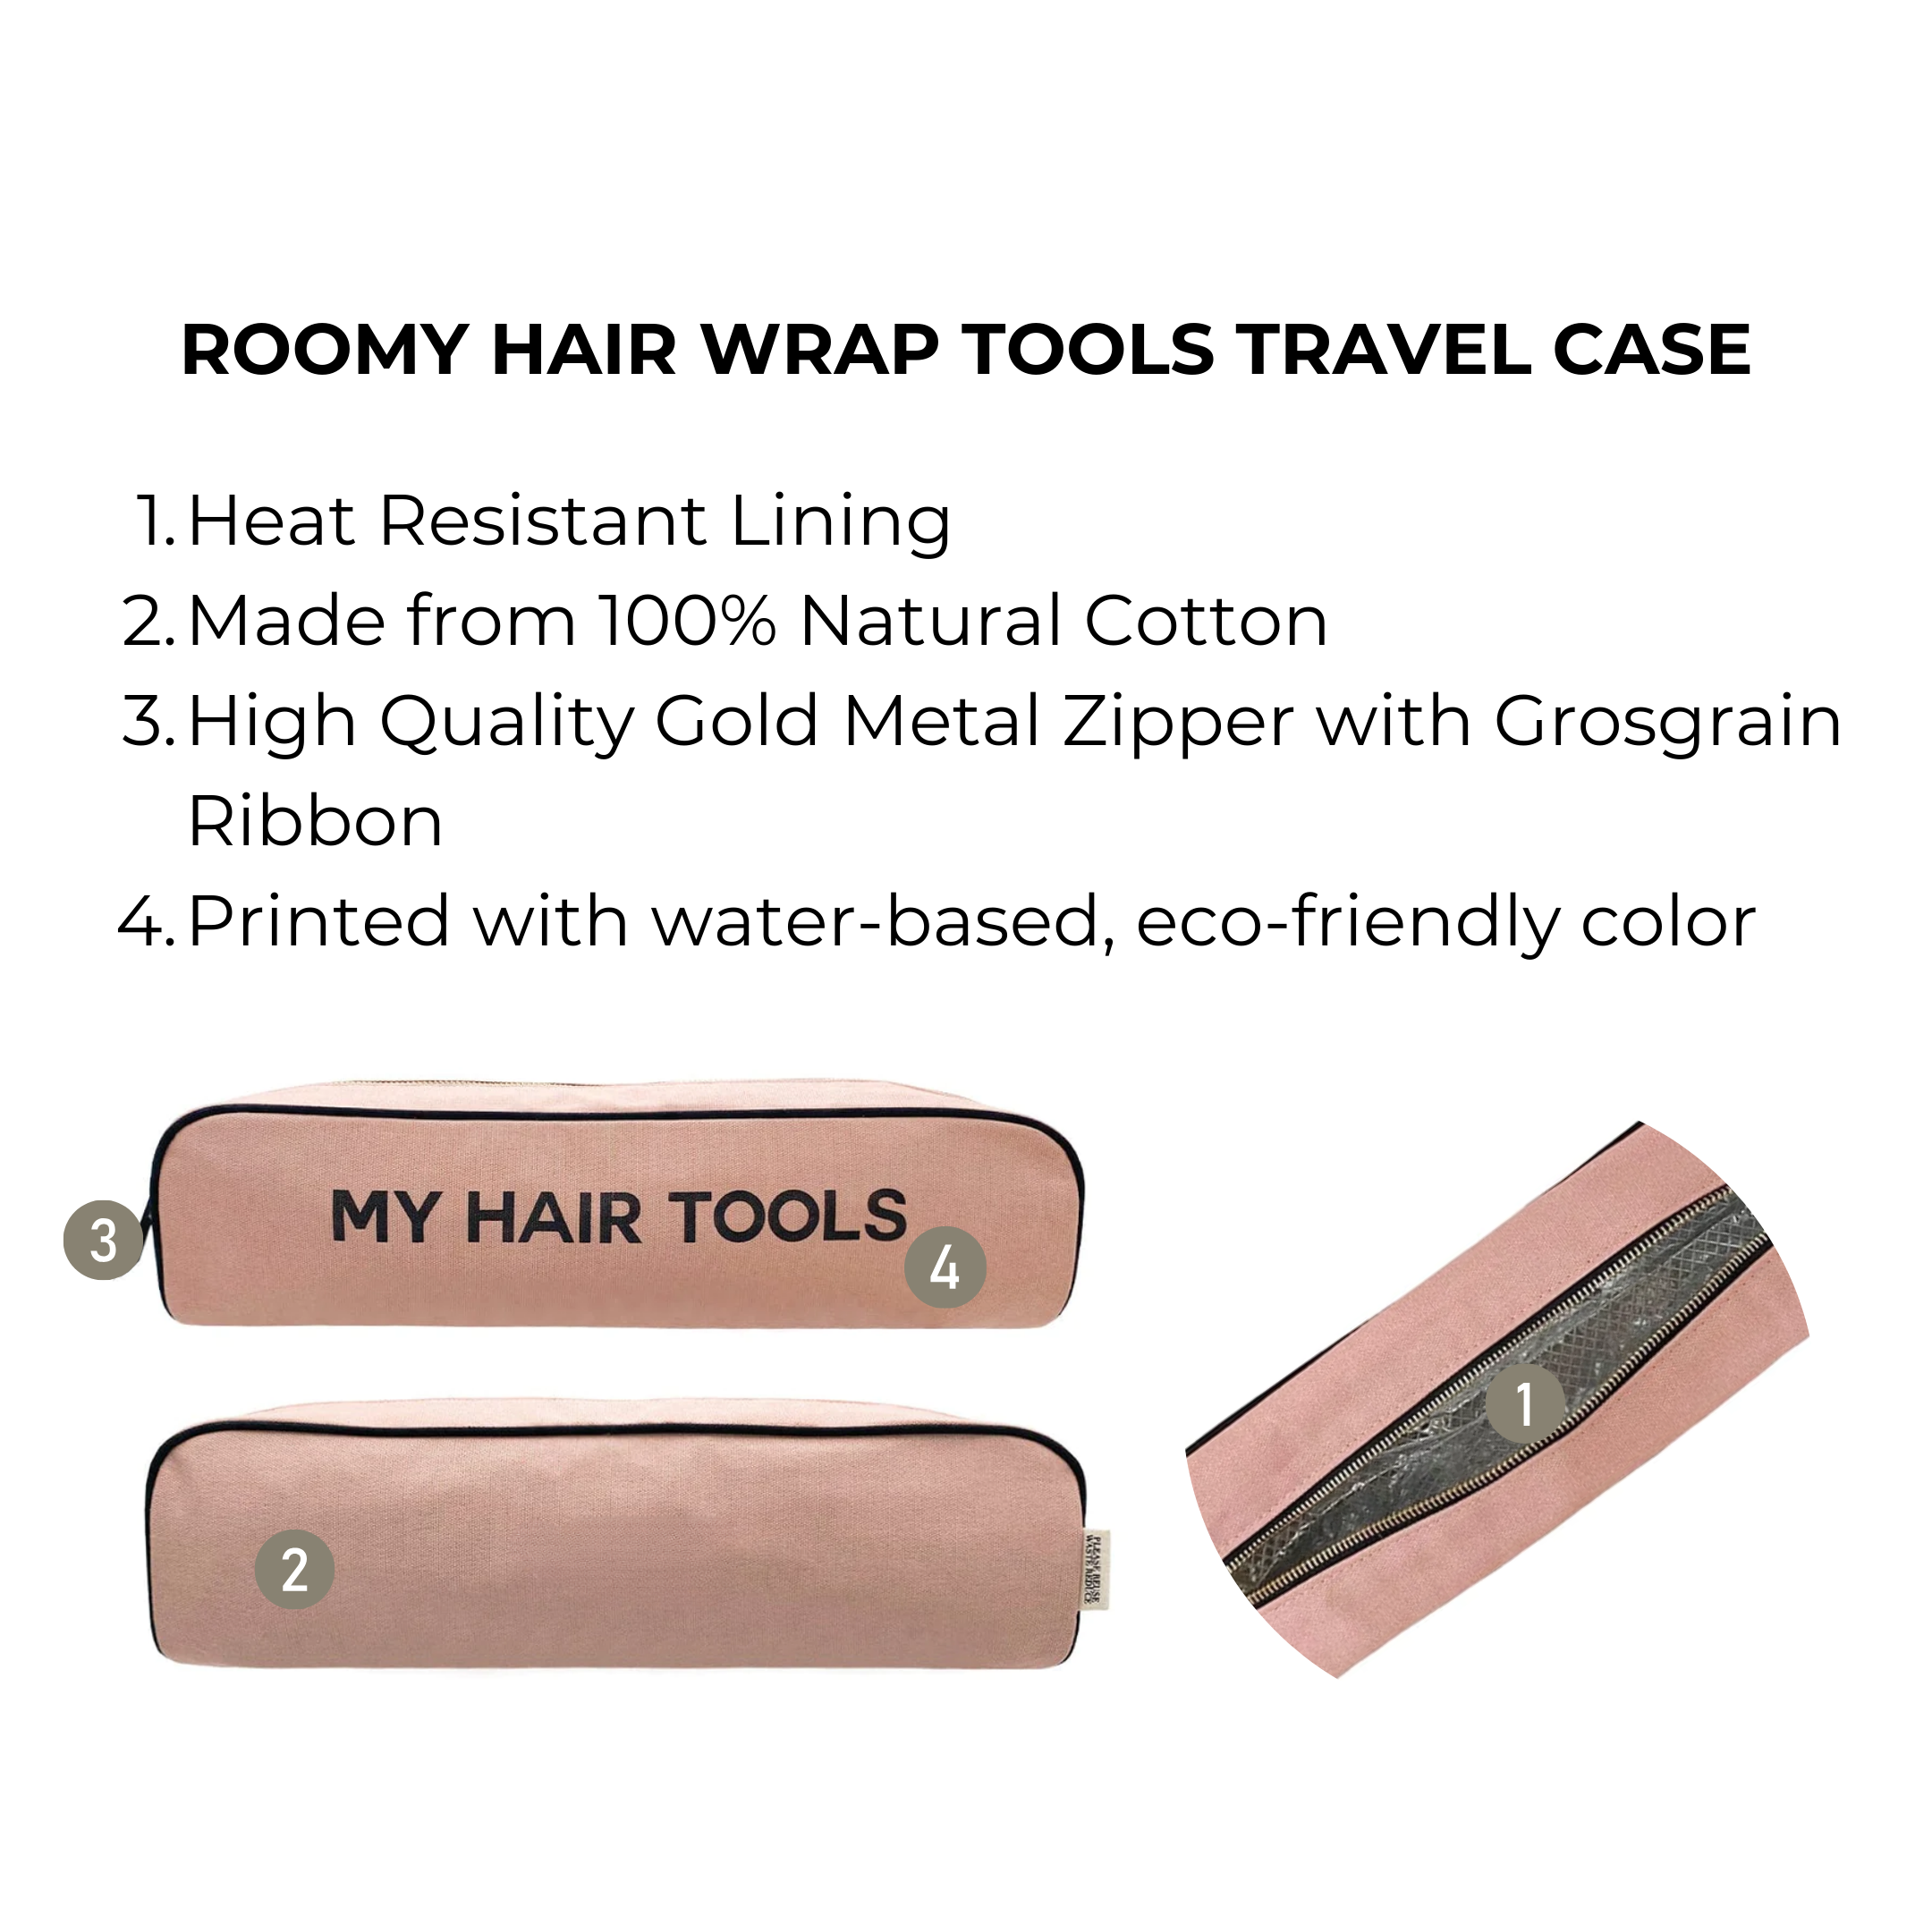 Roomy Hair Wrap Tools Travel Case, Pink/Blush | Bag-all